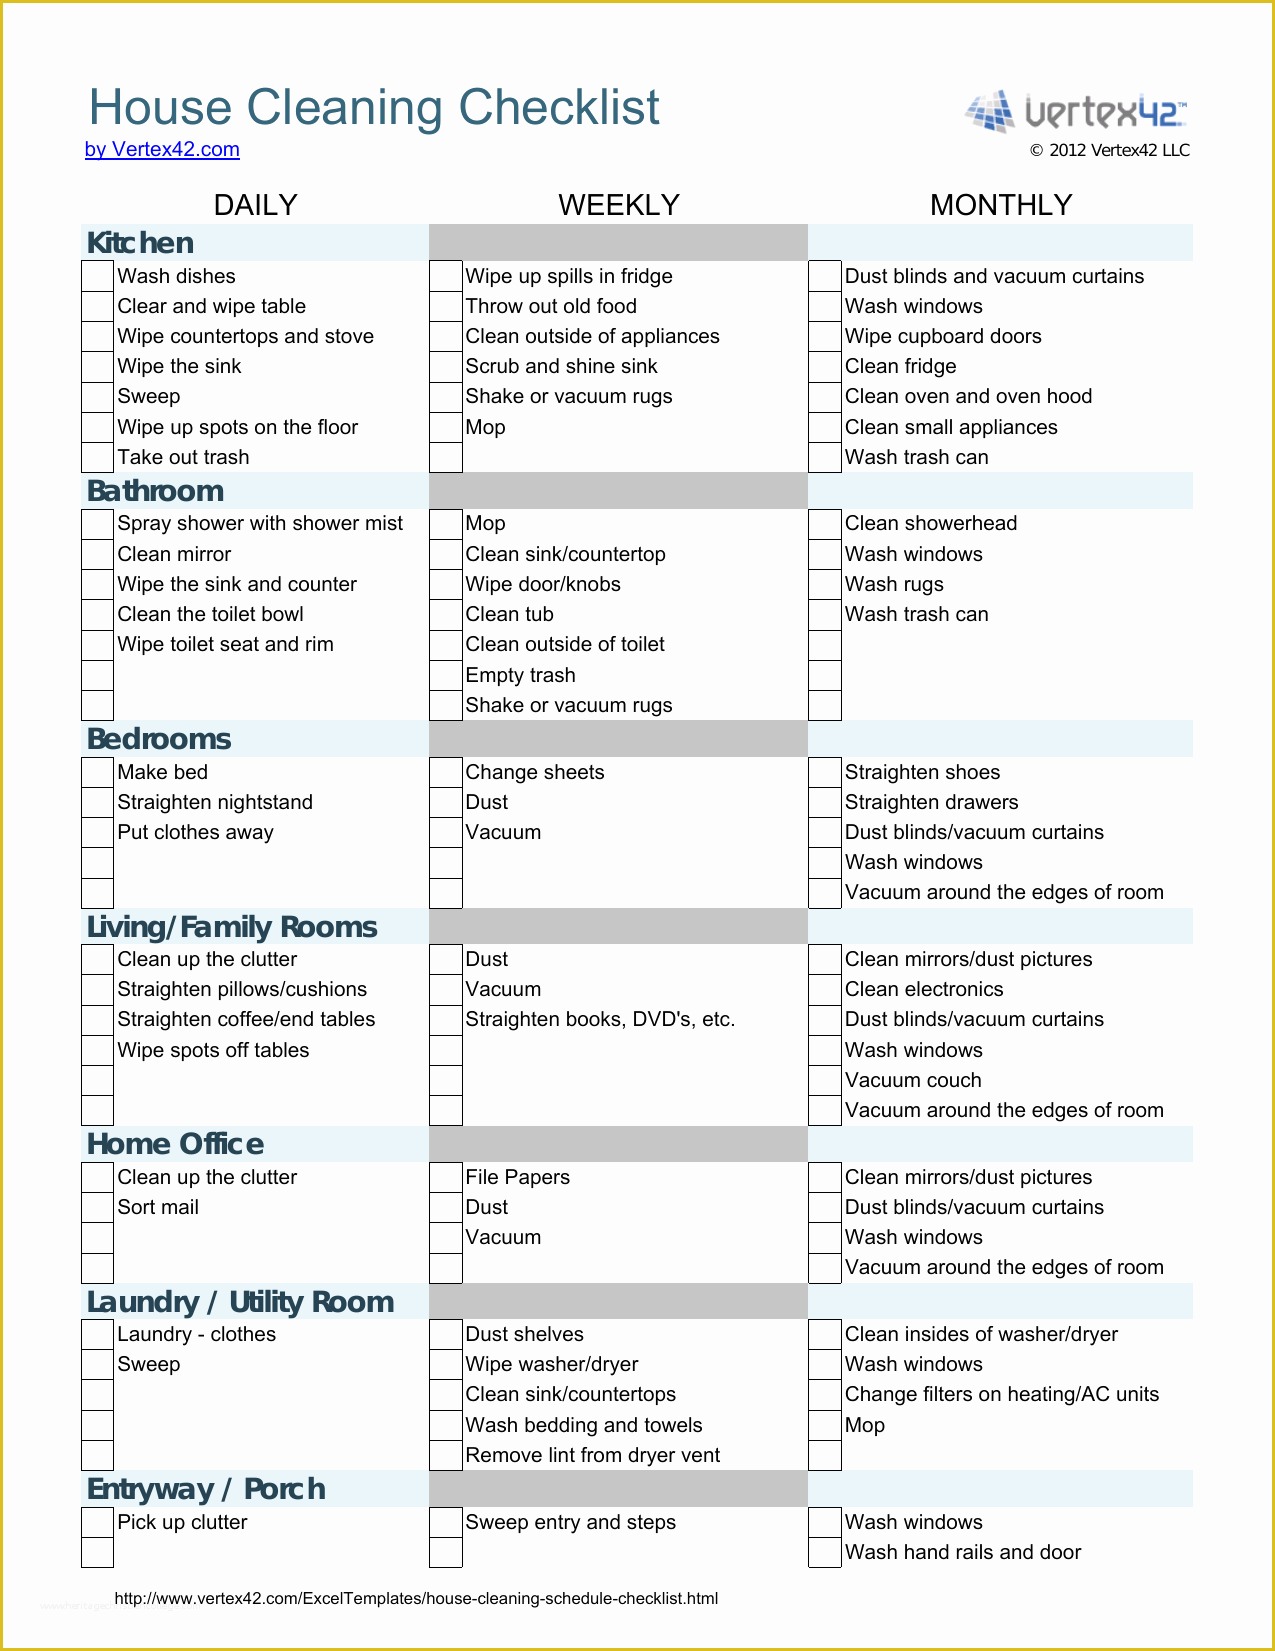 House Cleaning Checklist Template Free Of Download House Cleaning Checklist Template Excel